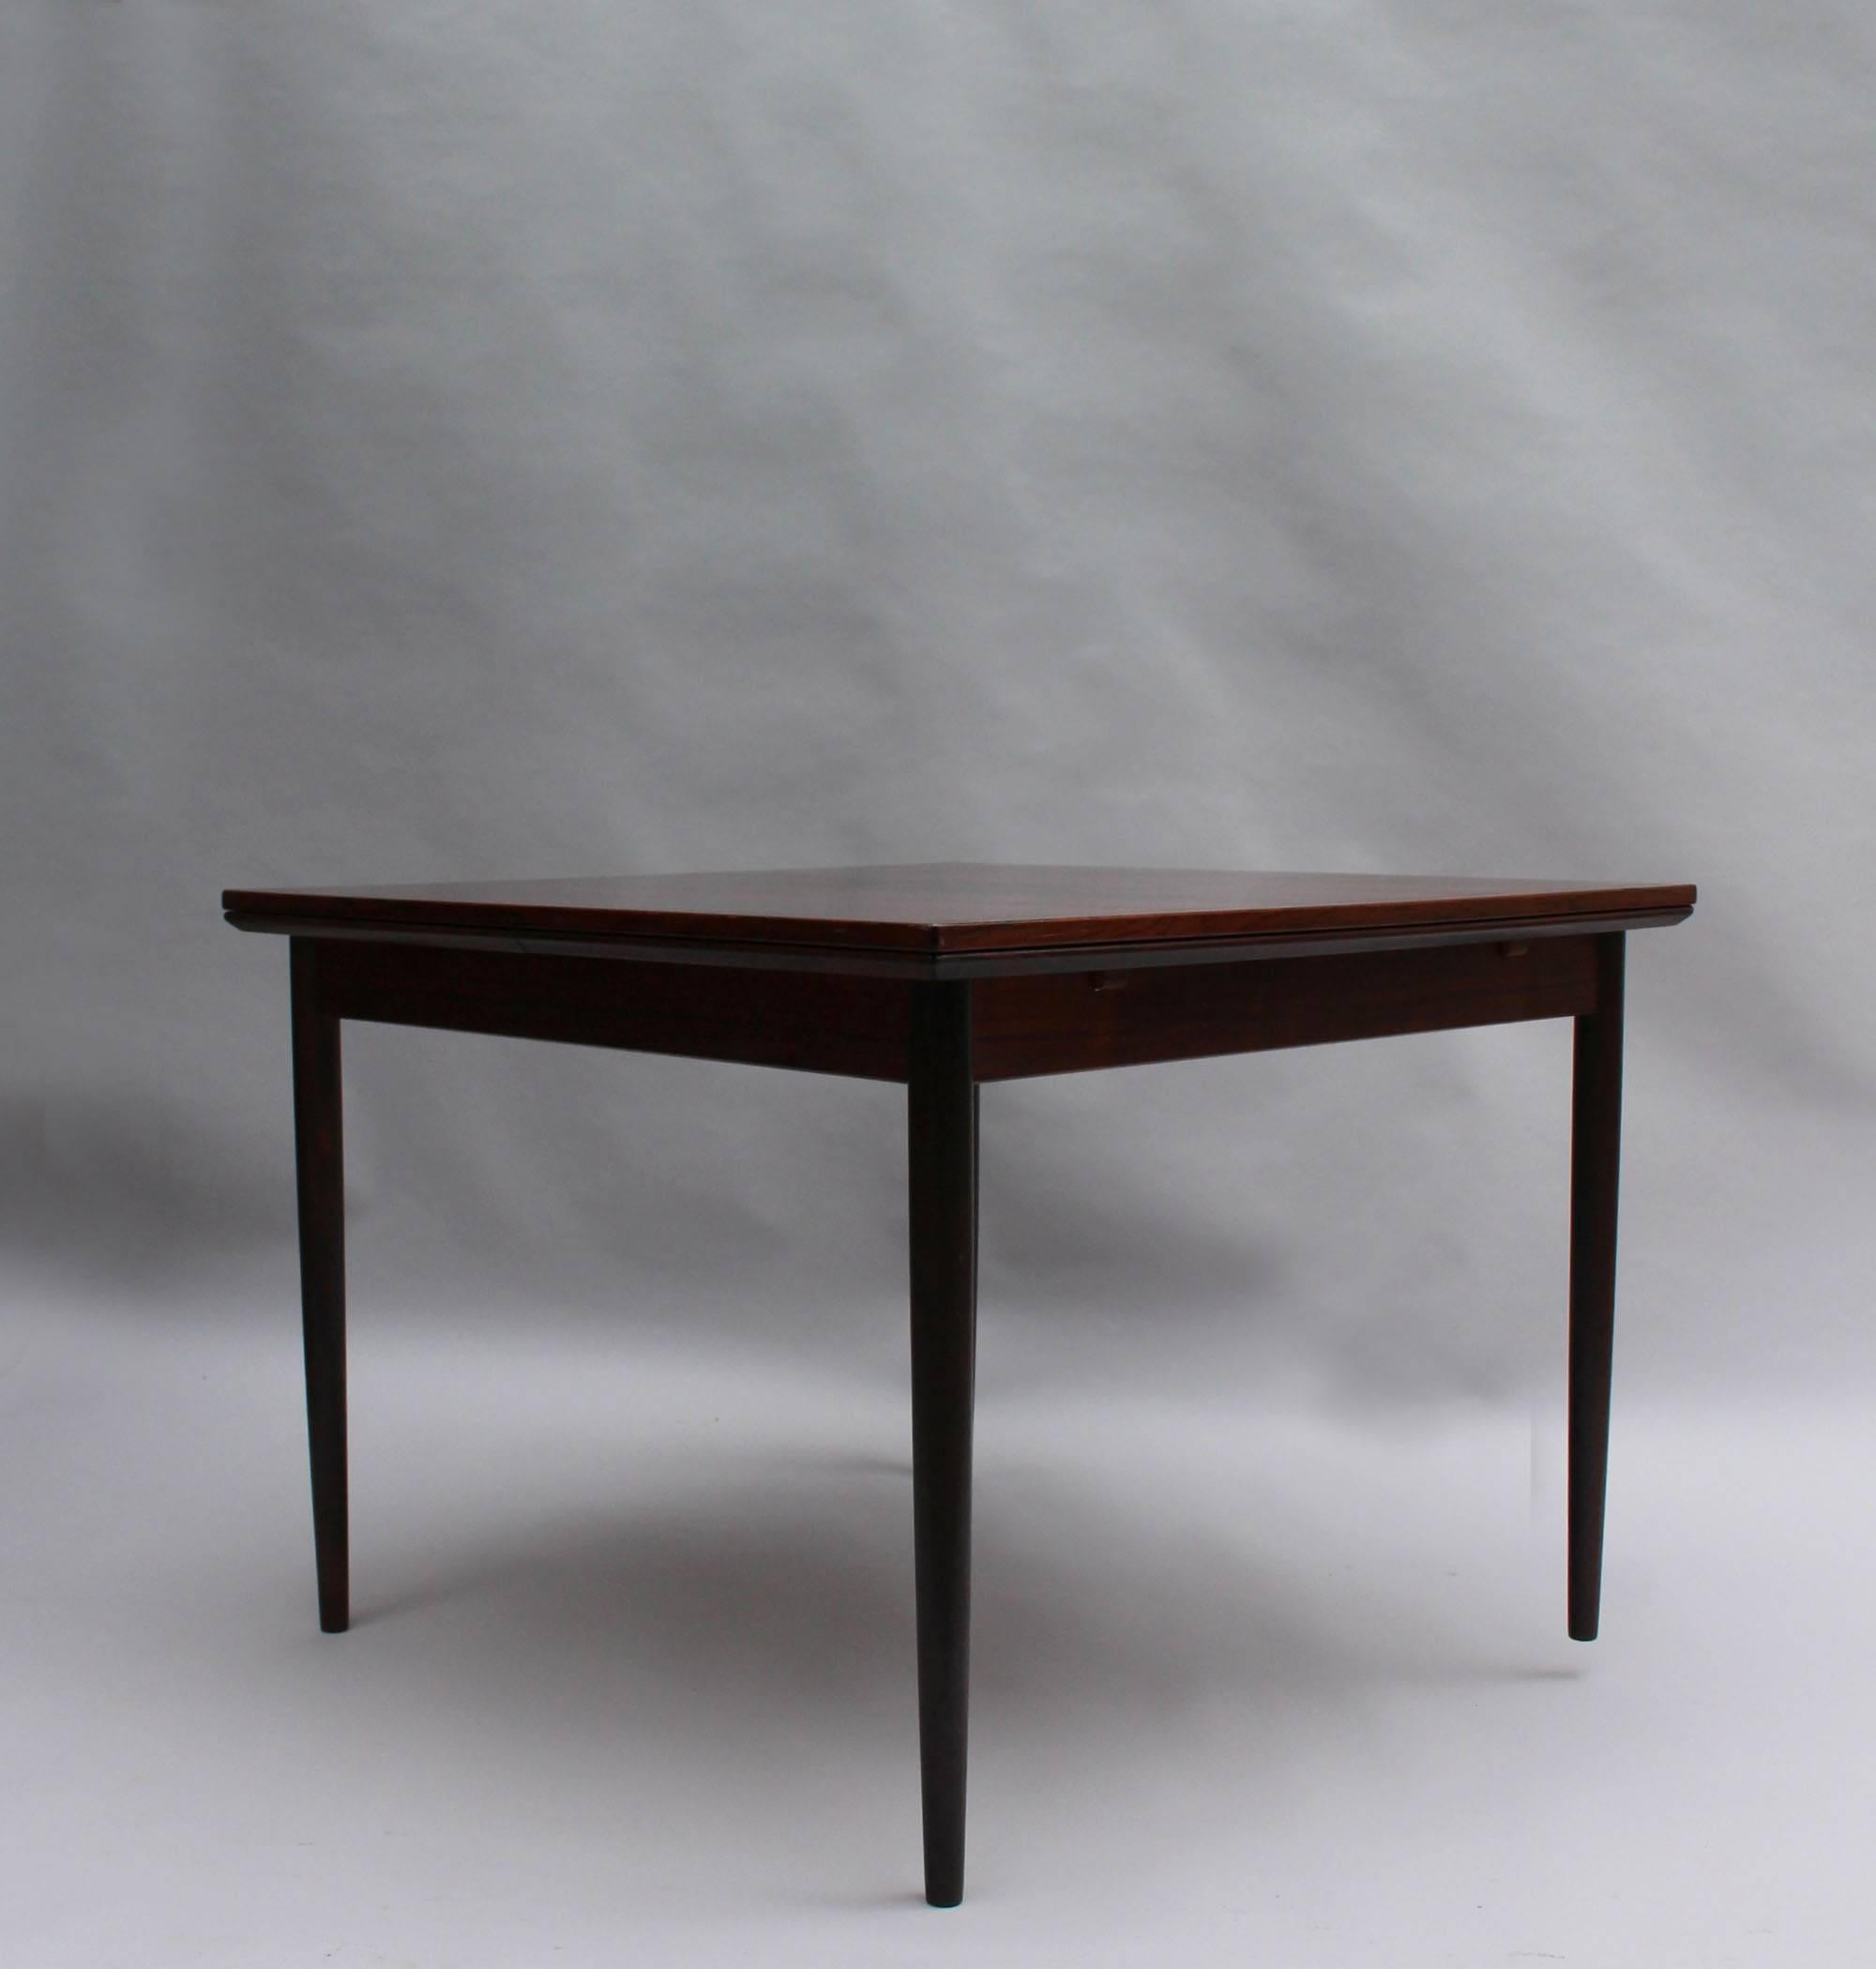 A fine mid-century square rosewood extendable Danish table by Svend Erik. Jensens Mobelfabrik
Length fully open is 78 3/4